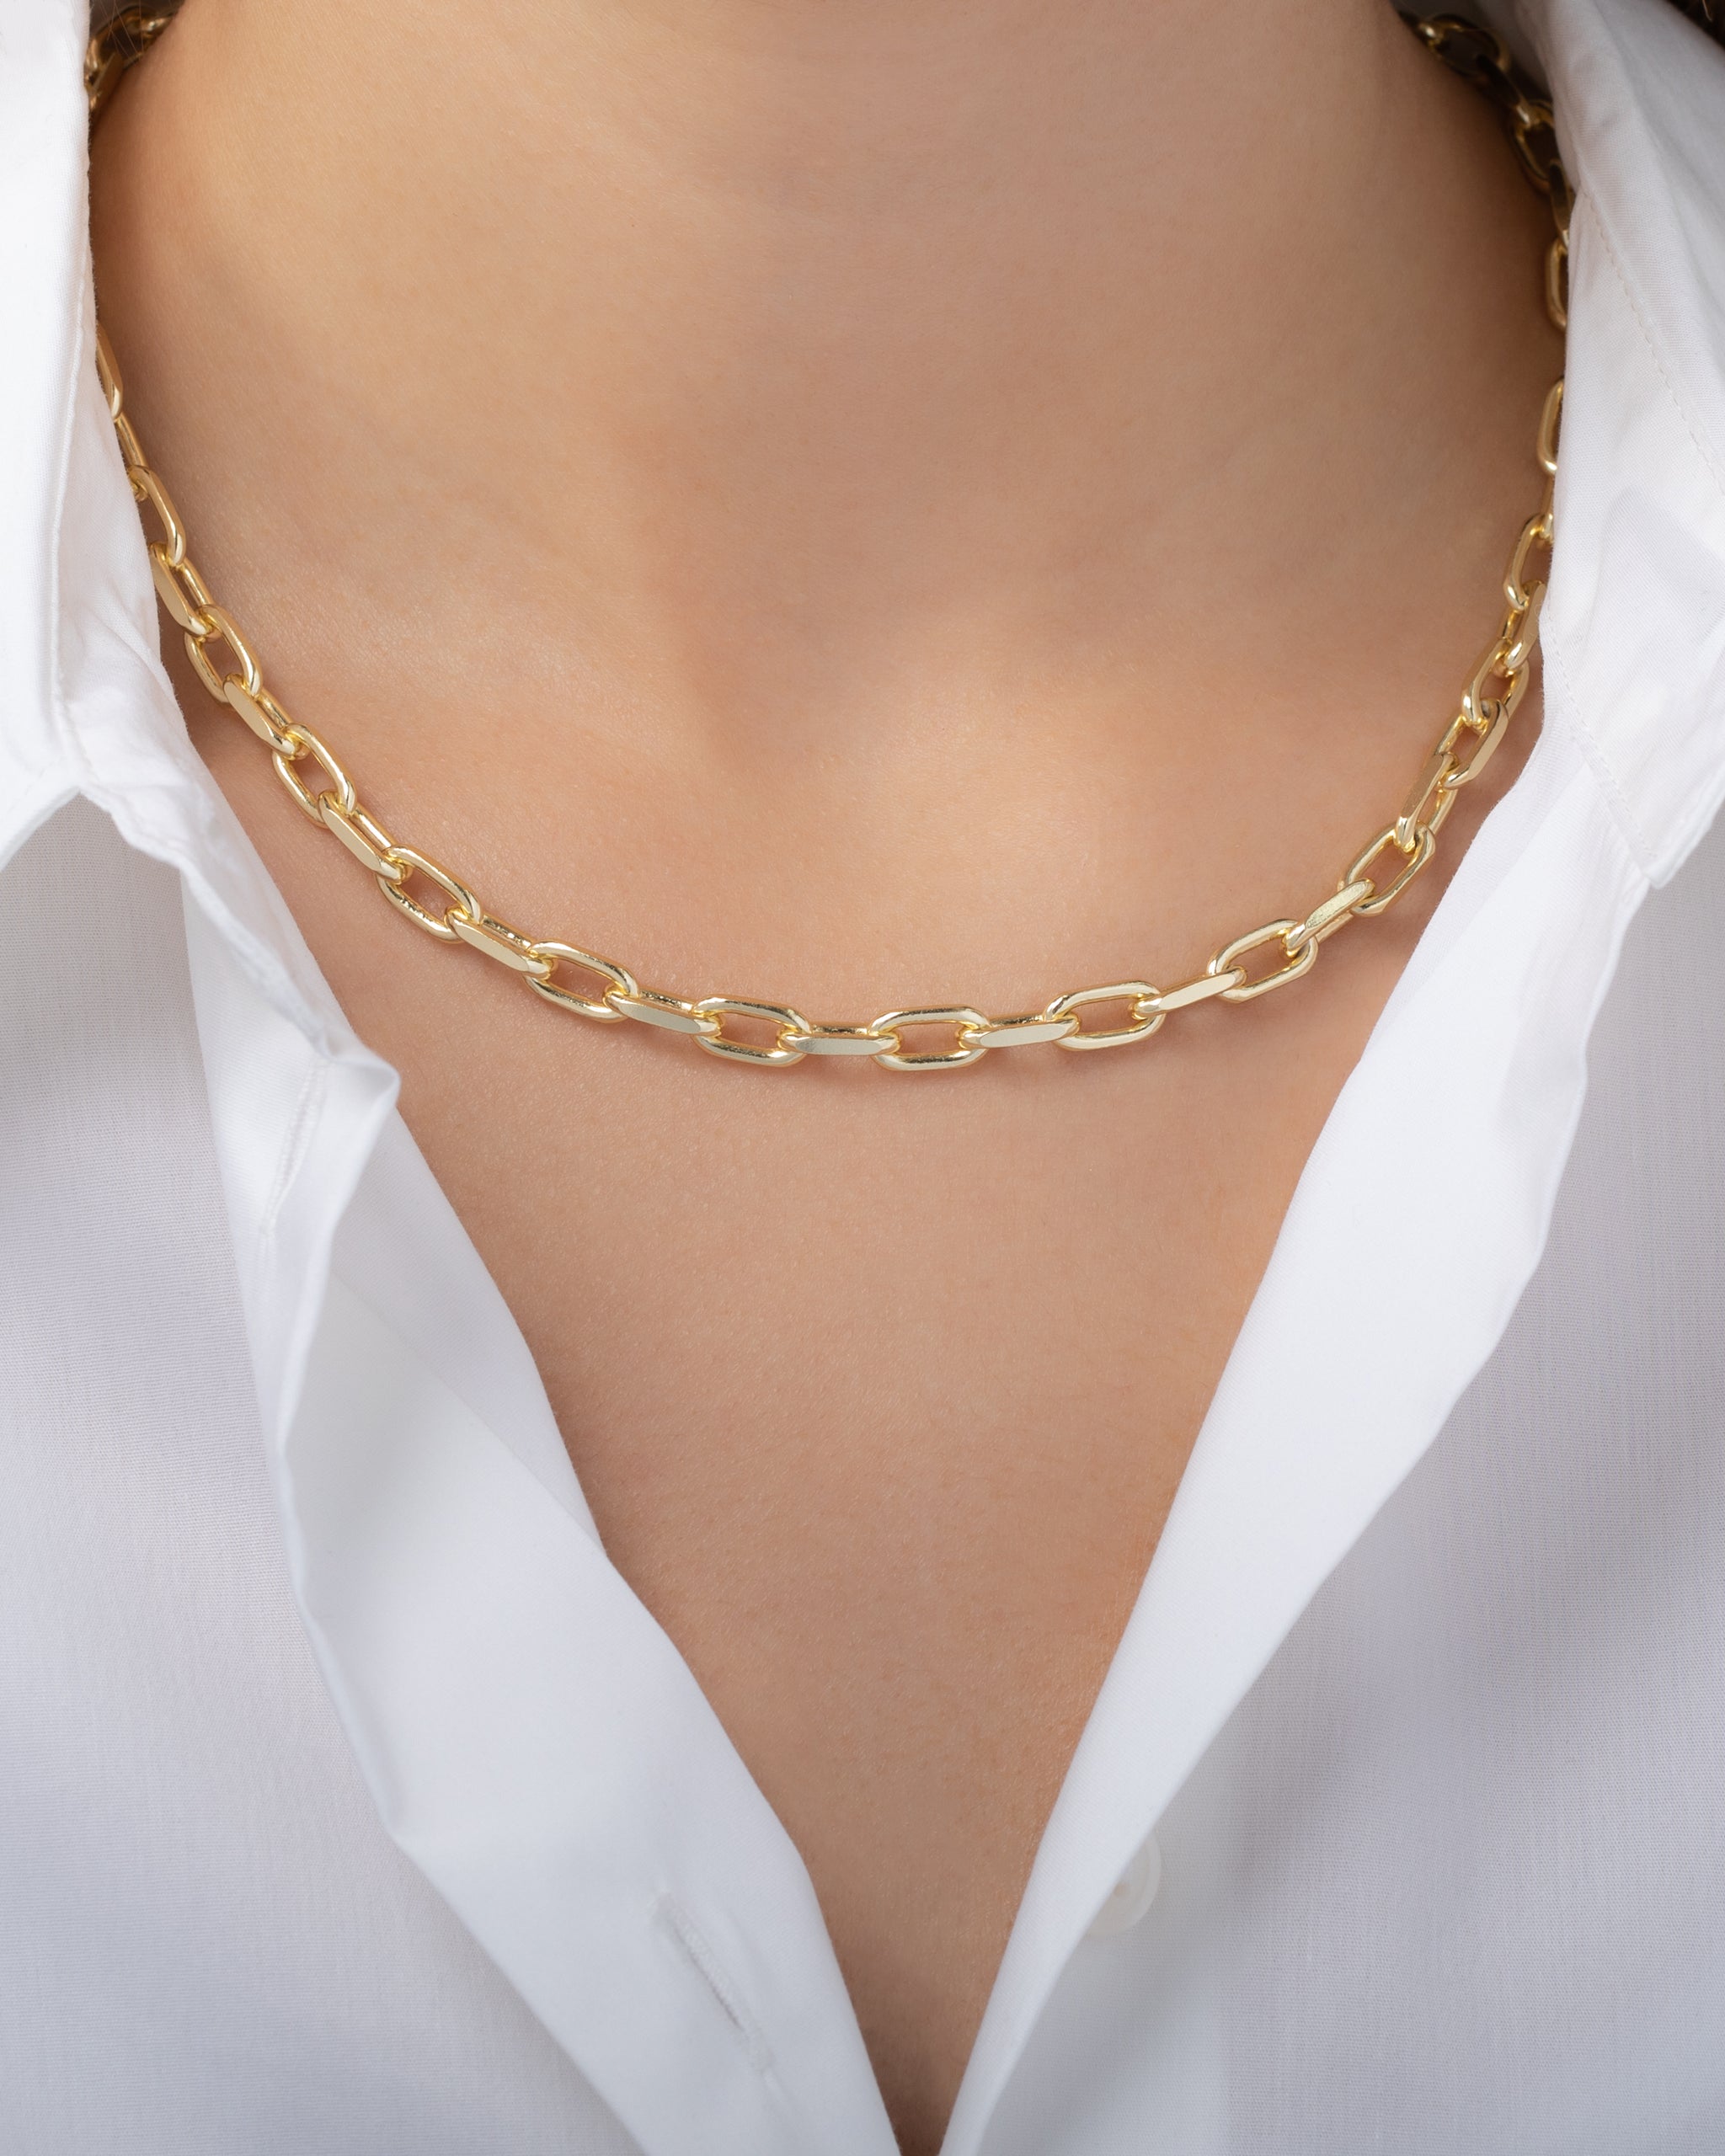 Classic Gold Vermeil Necklace for Her, Oval Rolo Link, Charm Necklace,  Personalized Necklace